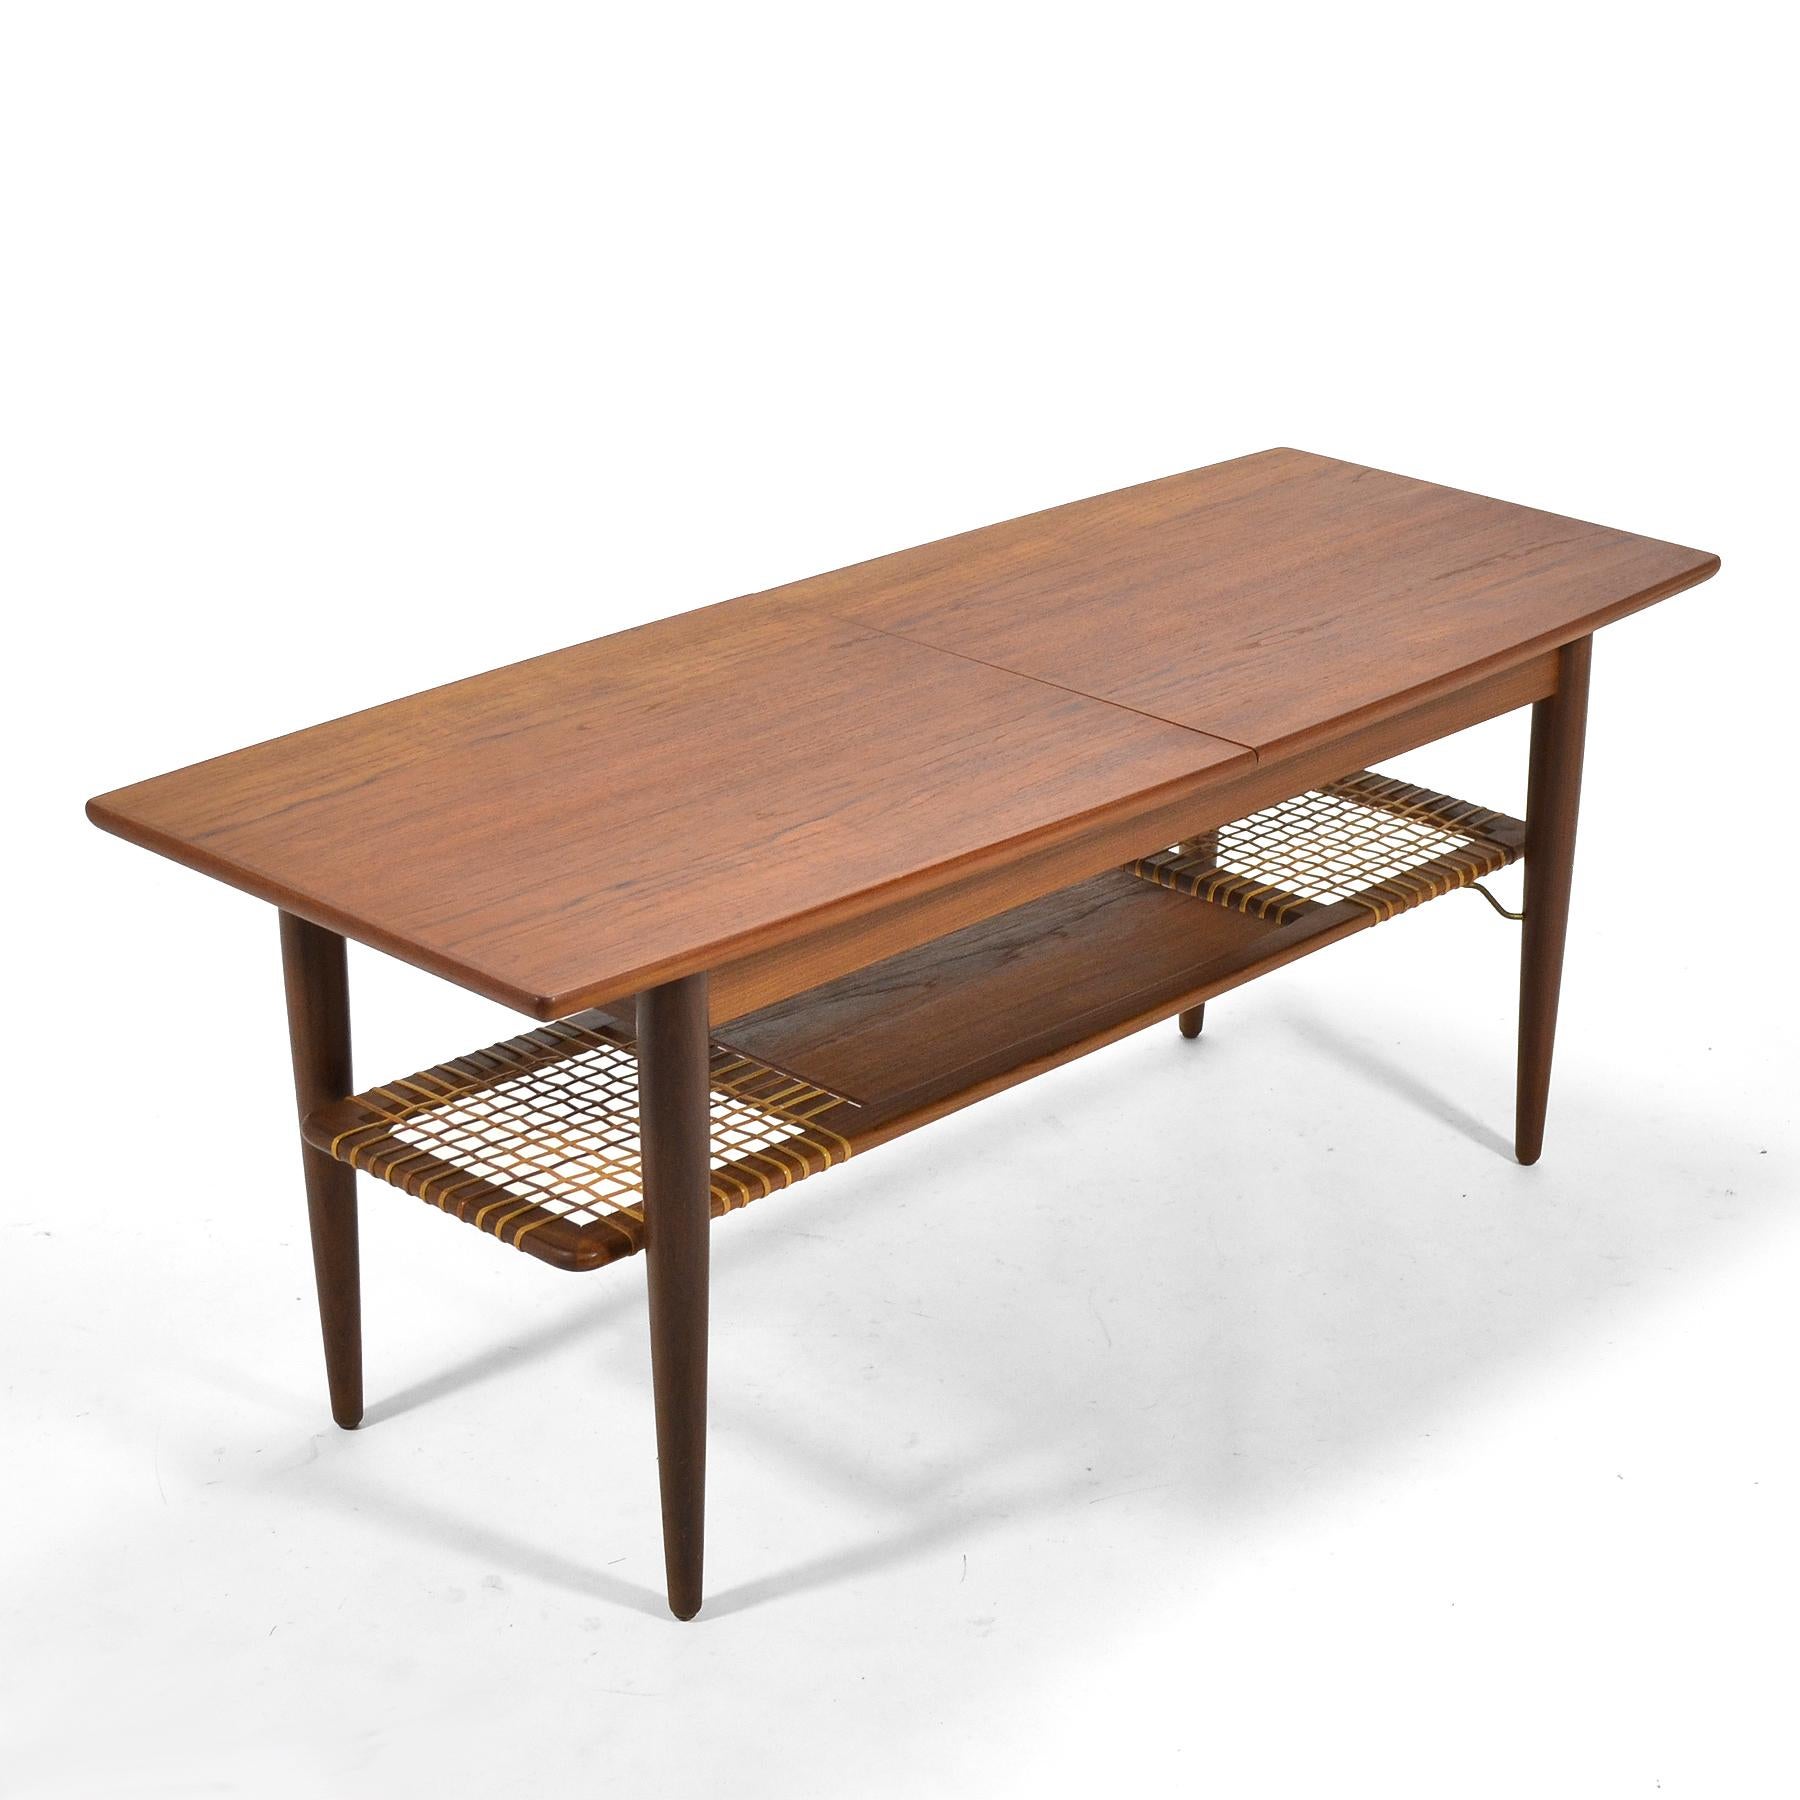 This exceptional teak coffee table has a top that expands with the addition of a 12